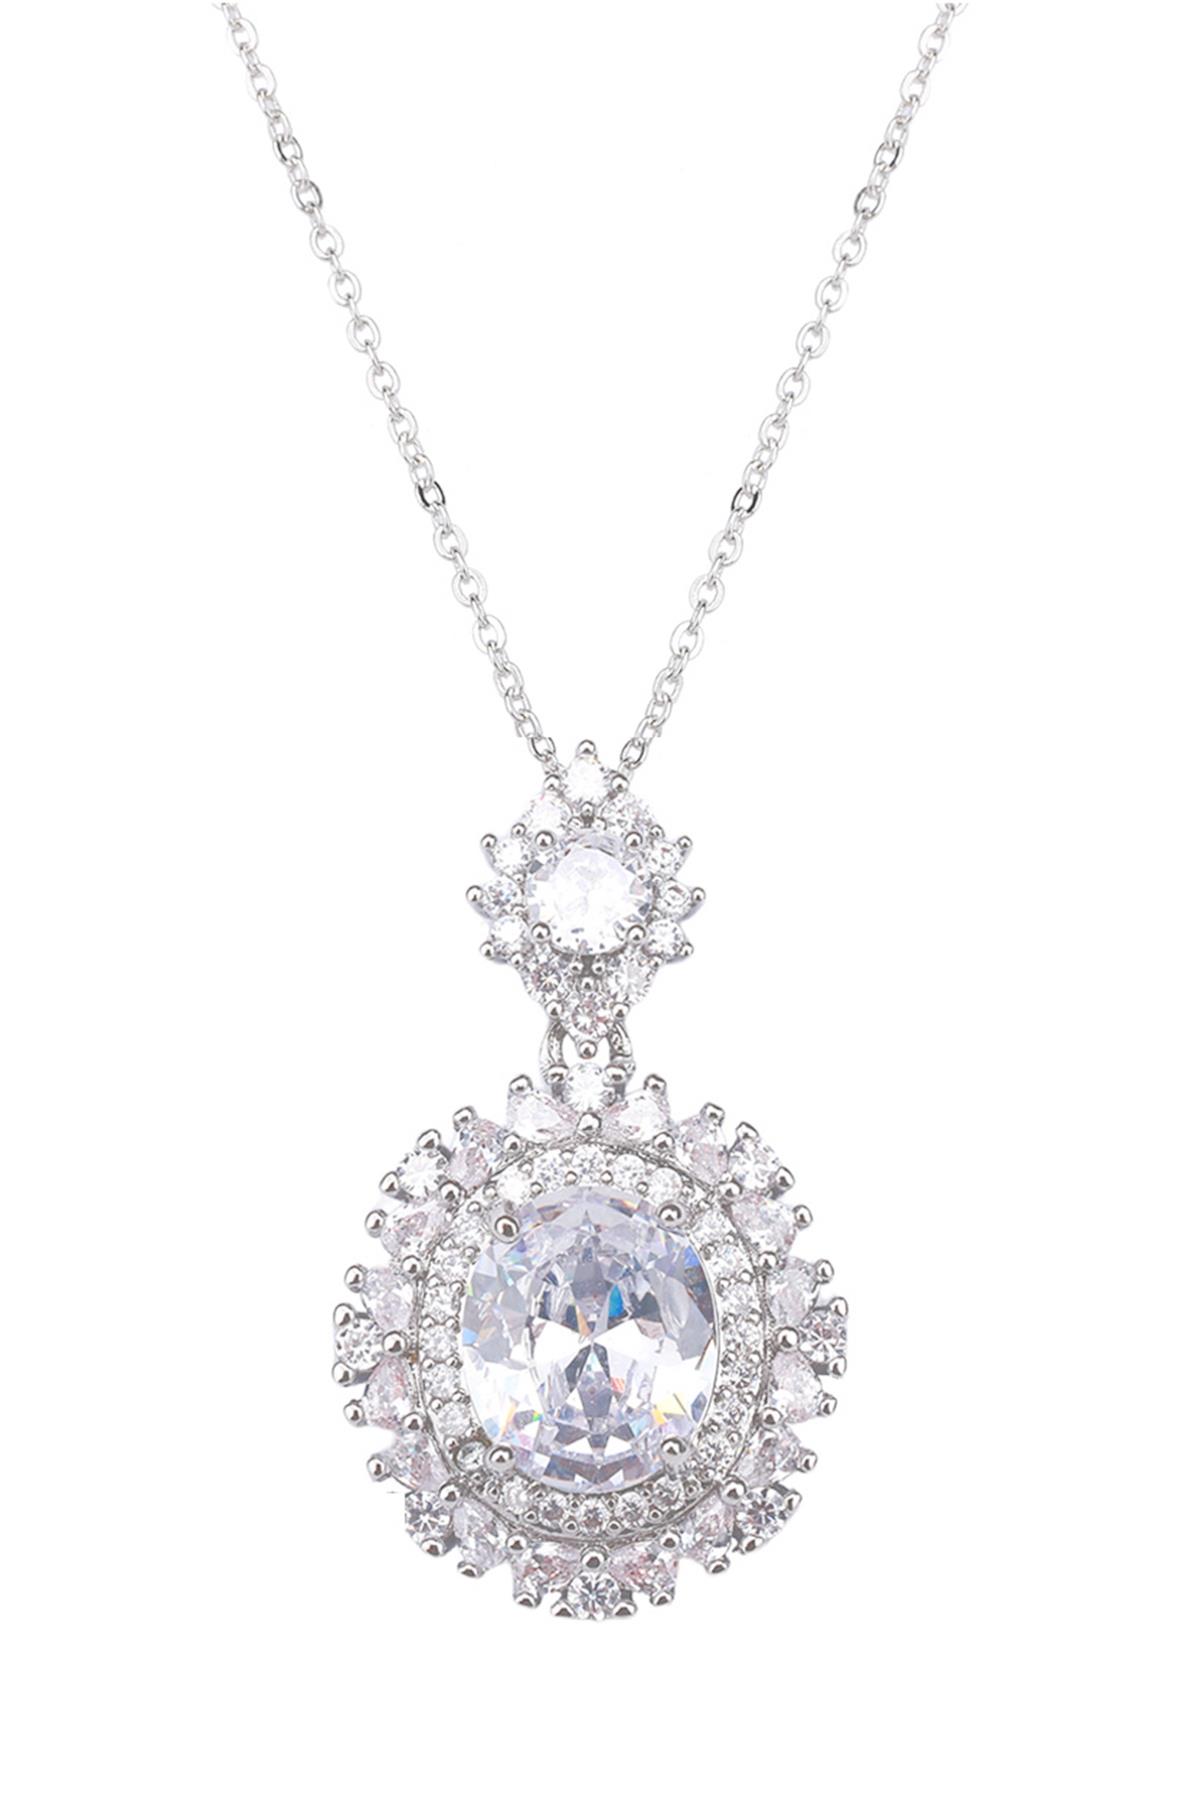 CRYSTAL OVAL PENDANT NECKLACE